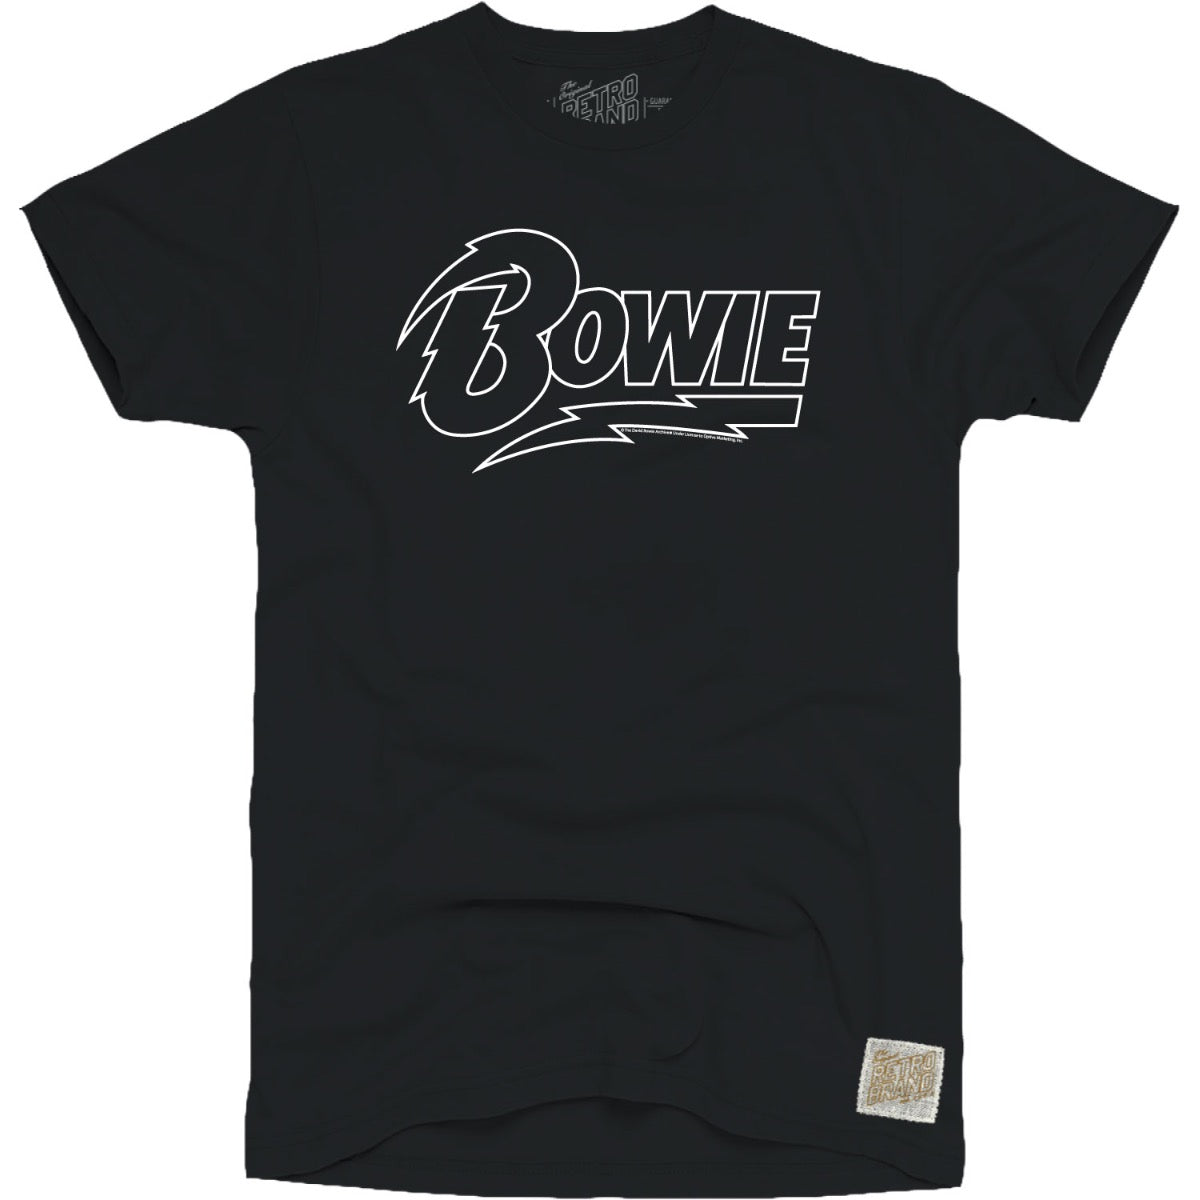 Bowie in white outline font with sideways lightning bolt on our 100% cotton unisex tee in black